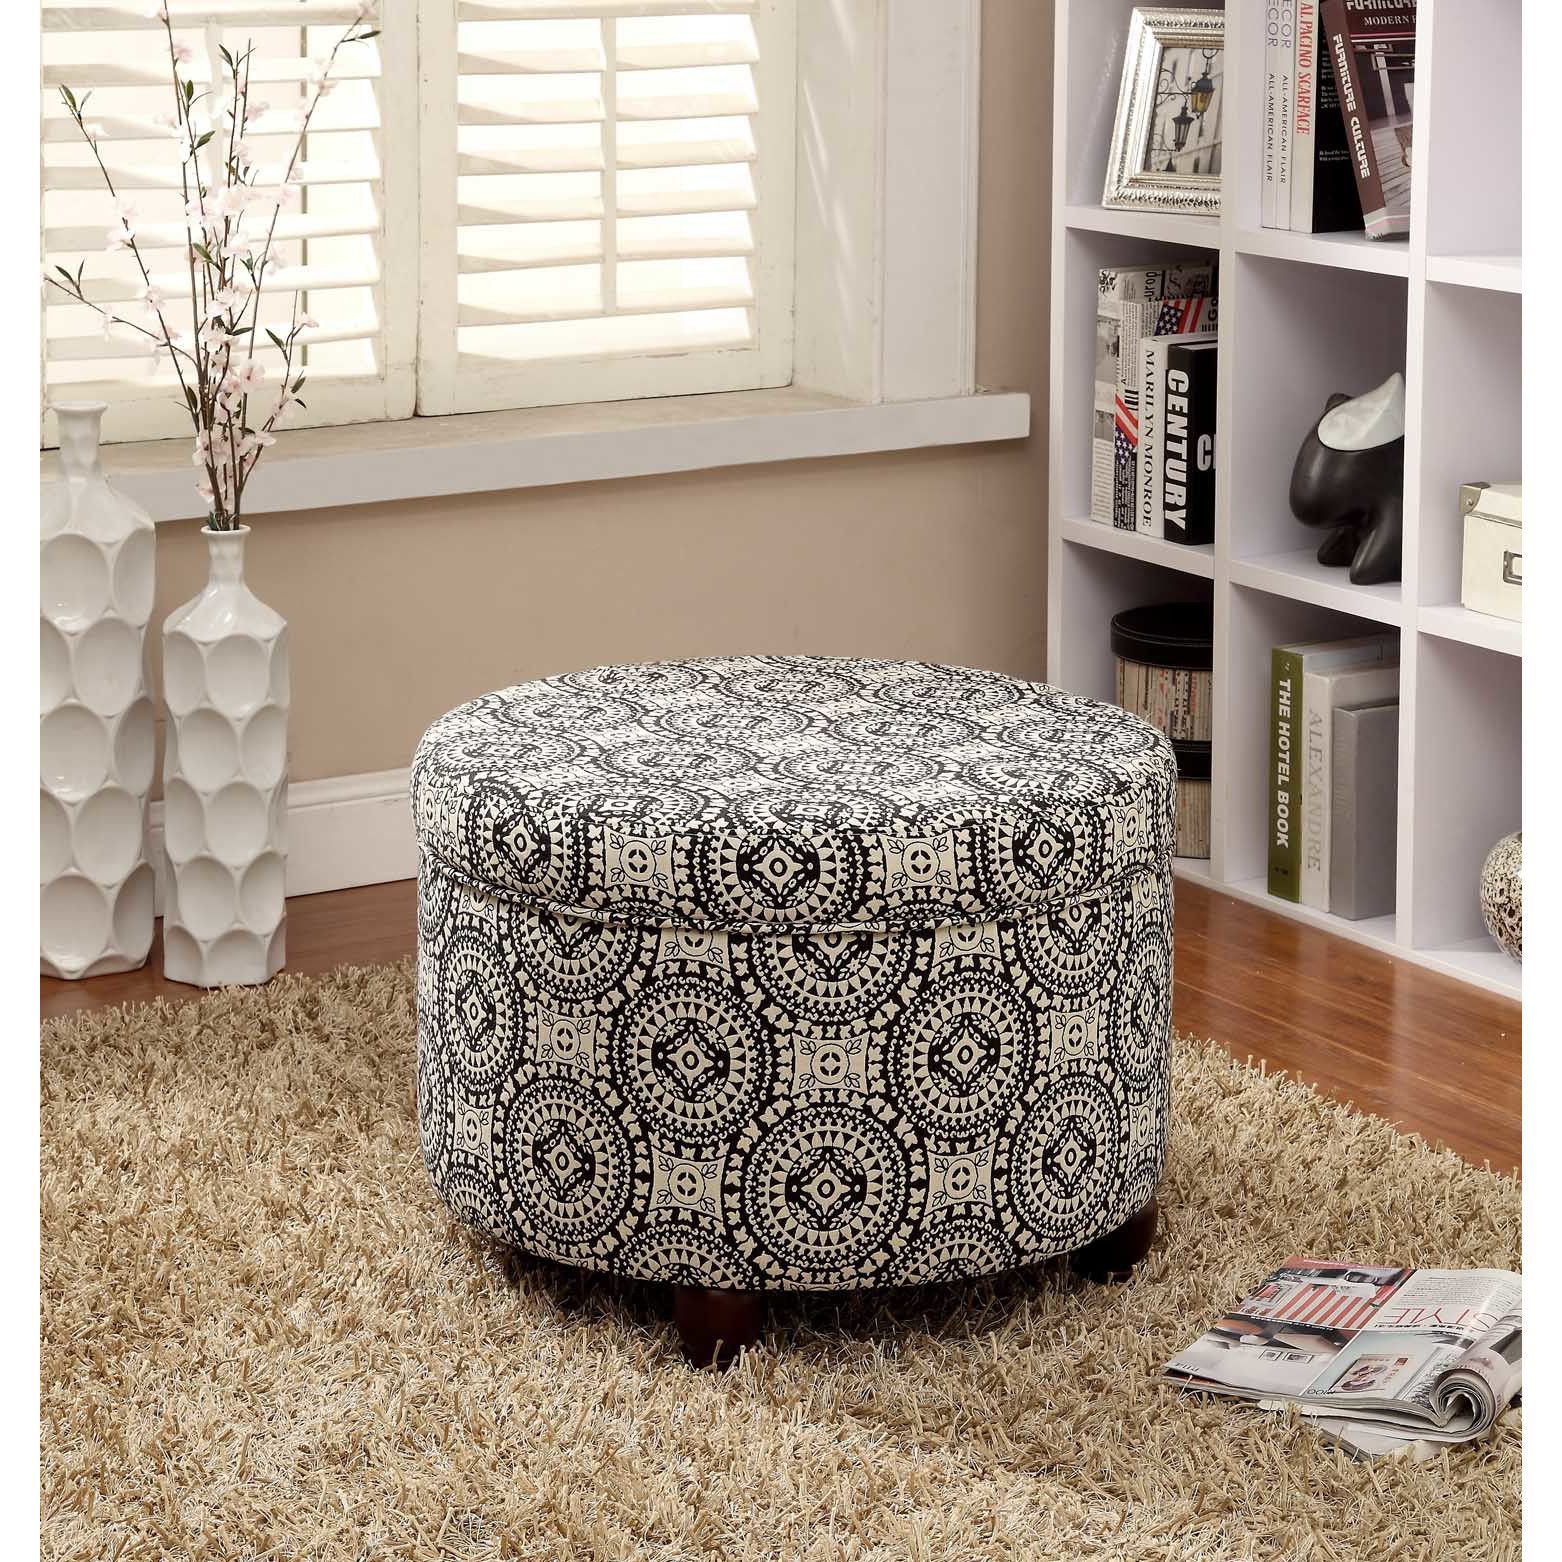 Pin On Stuff With Round Black Tasseled Ottomans (View 13 of 20)